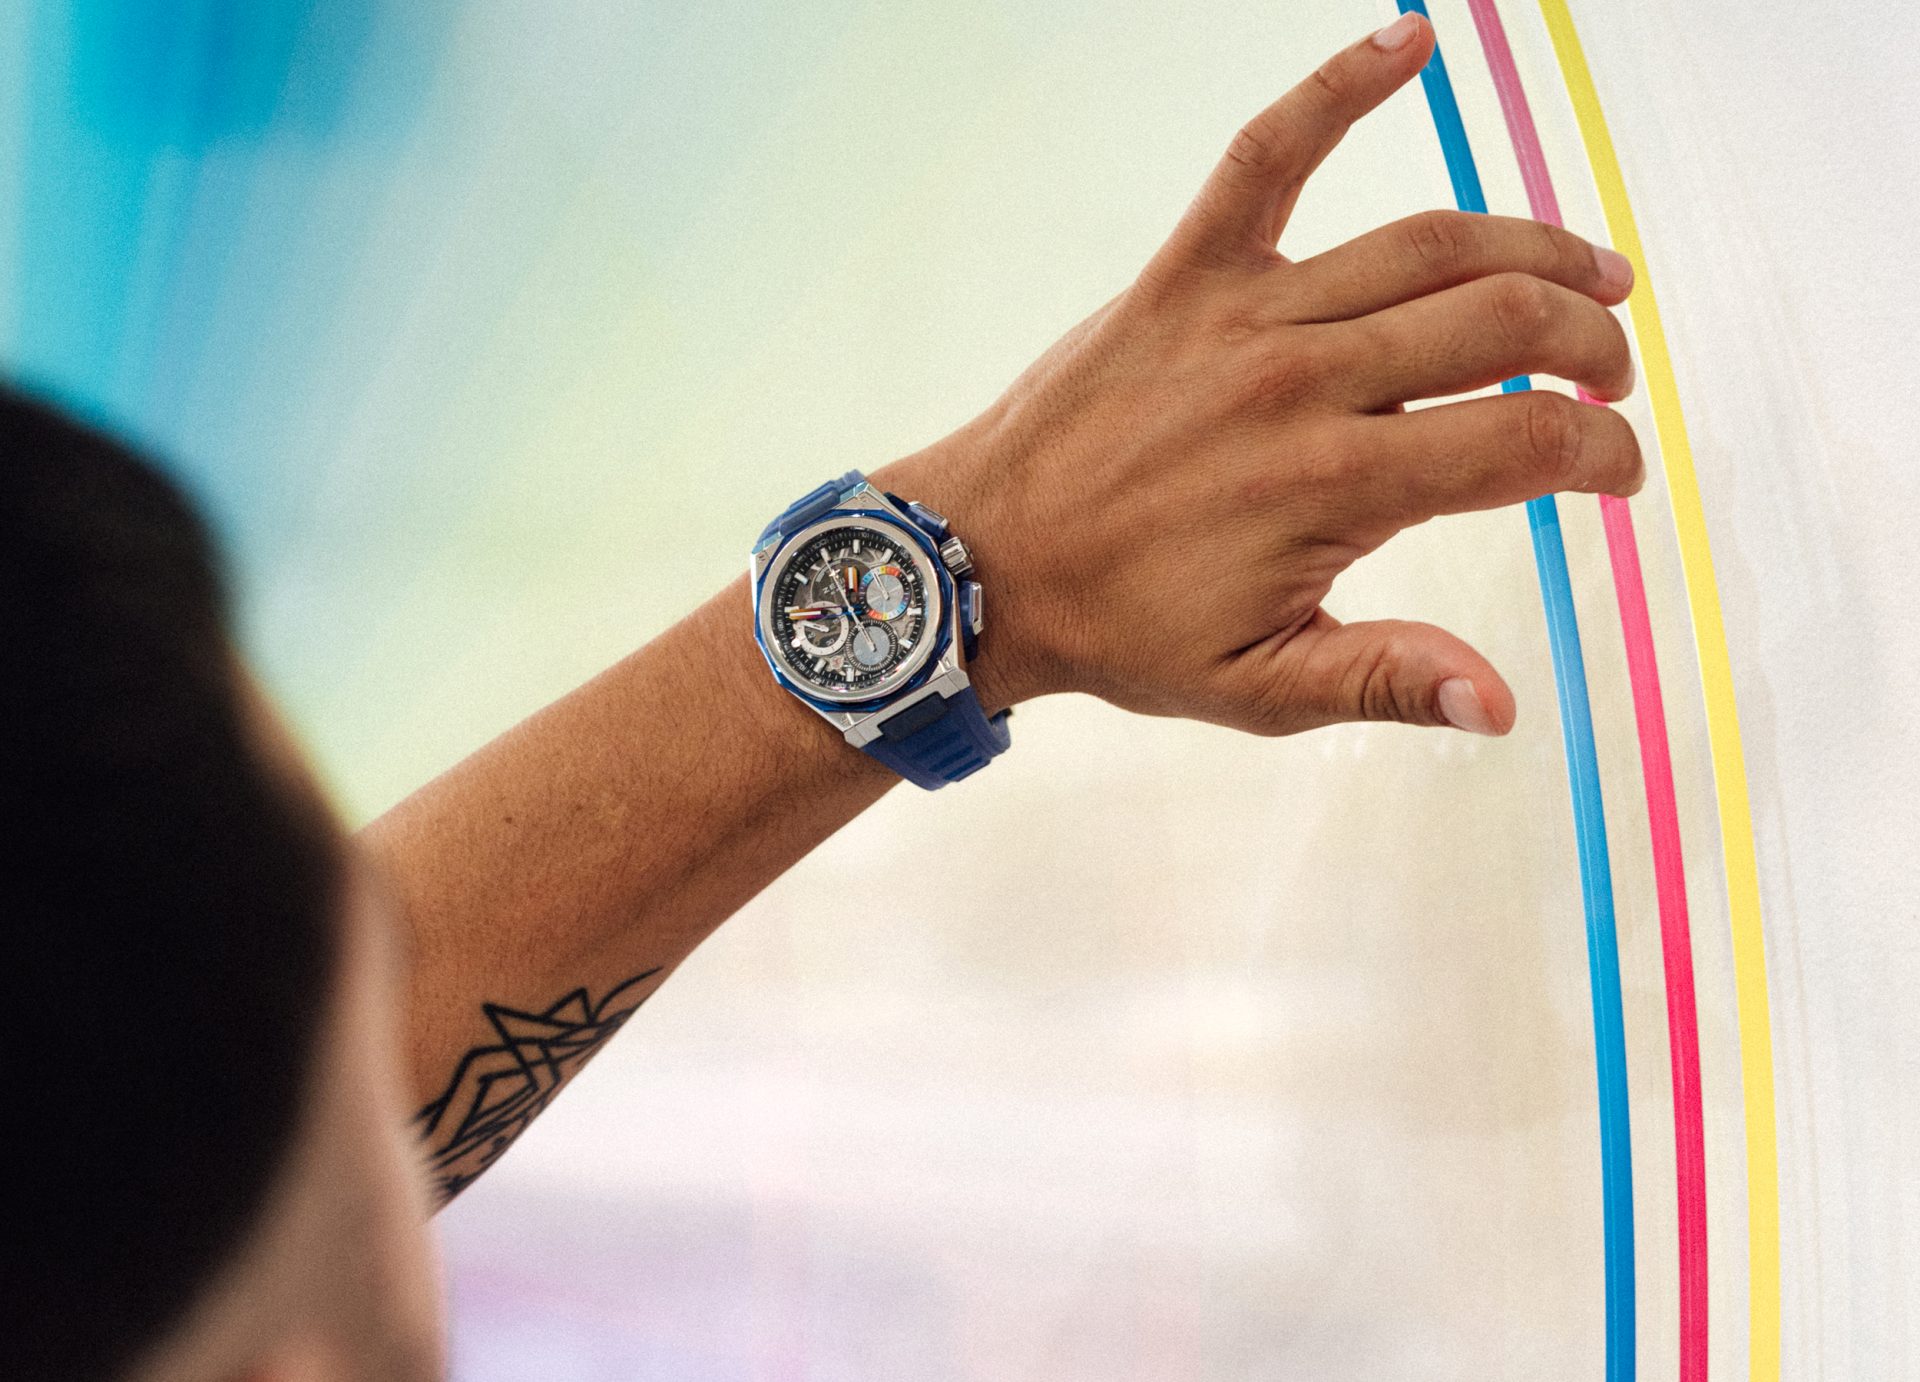 Watch Brands Embrace Pantone Illuminating Yellow – The Watch Pages